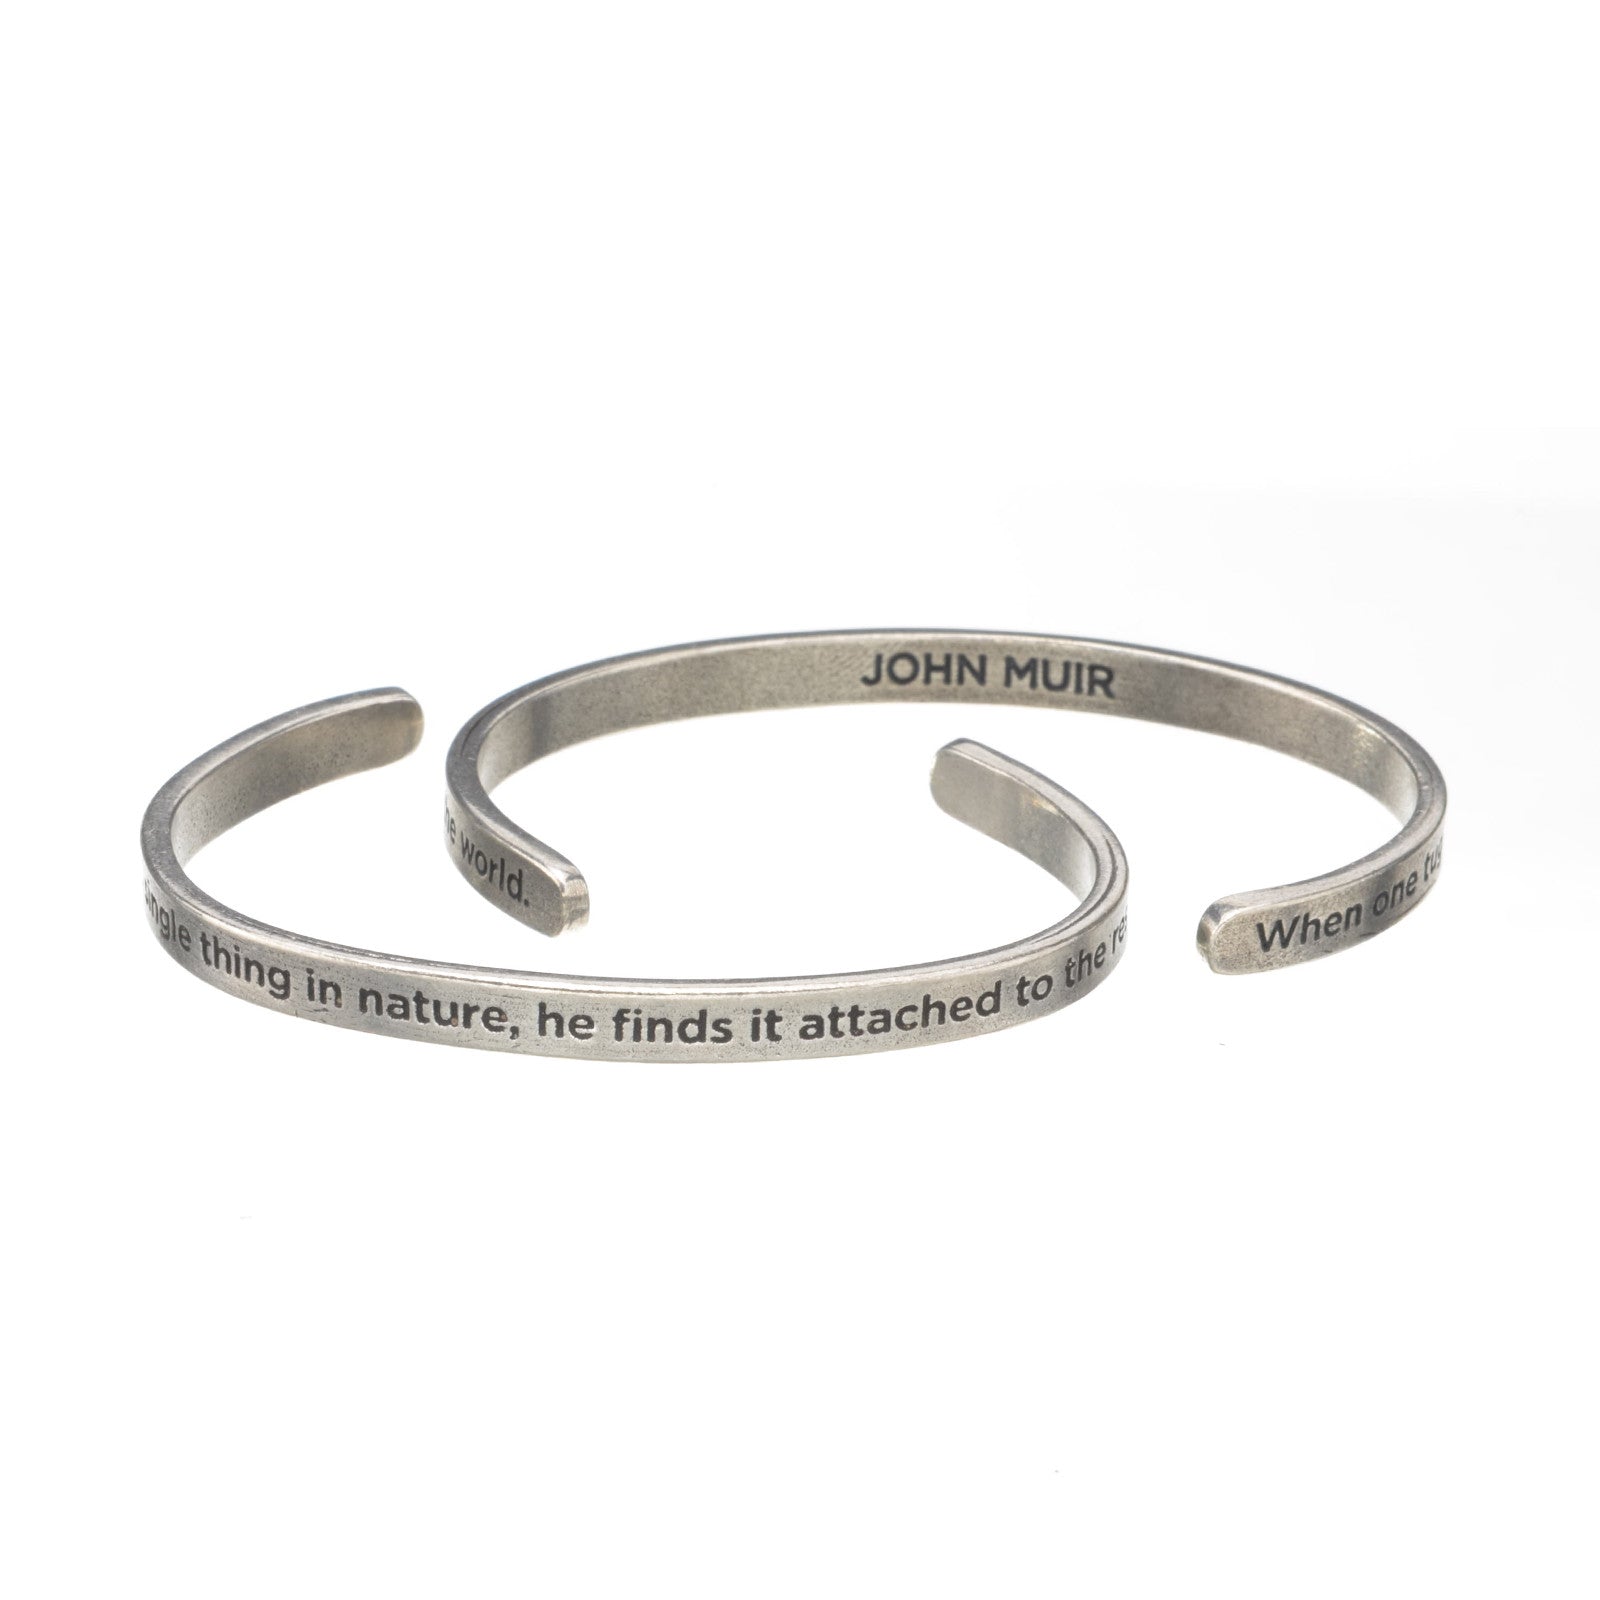 When One Tugs at a Single Thing in Nature... John Muir Quotable Cuff Bracelet